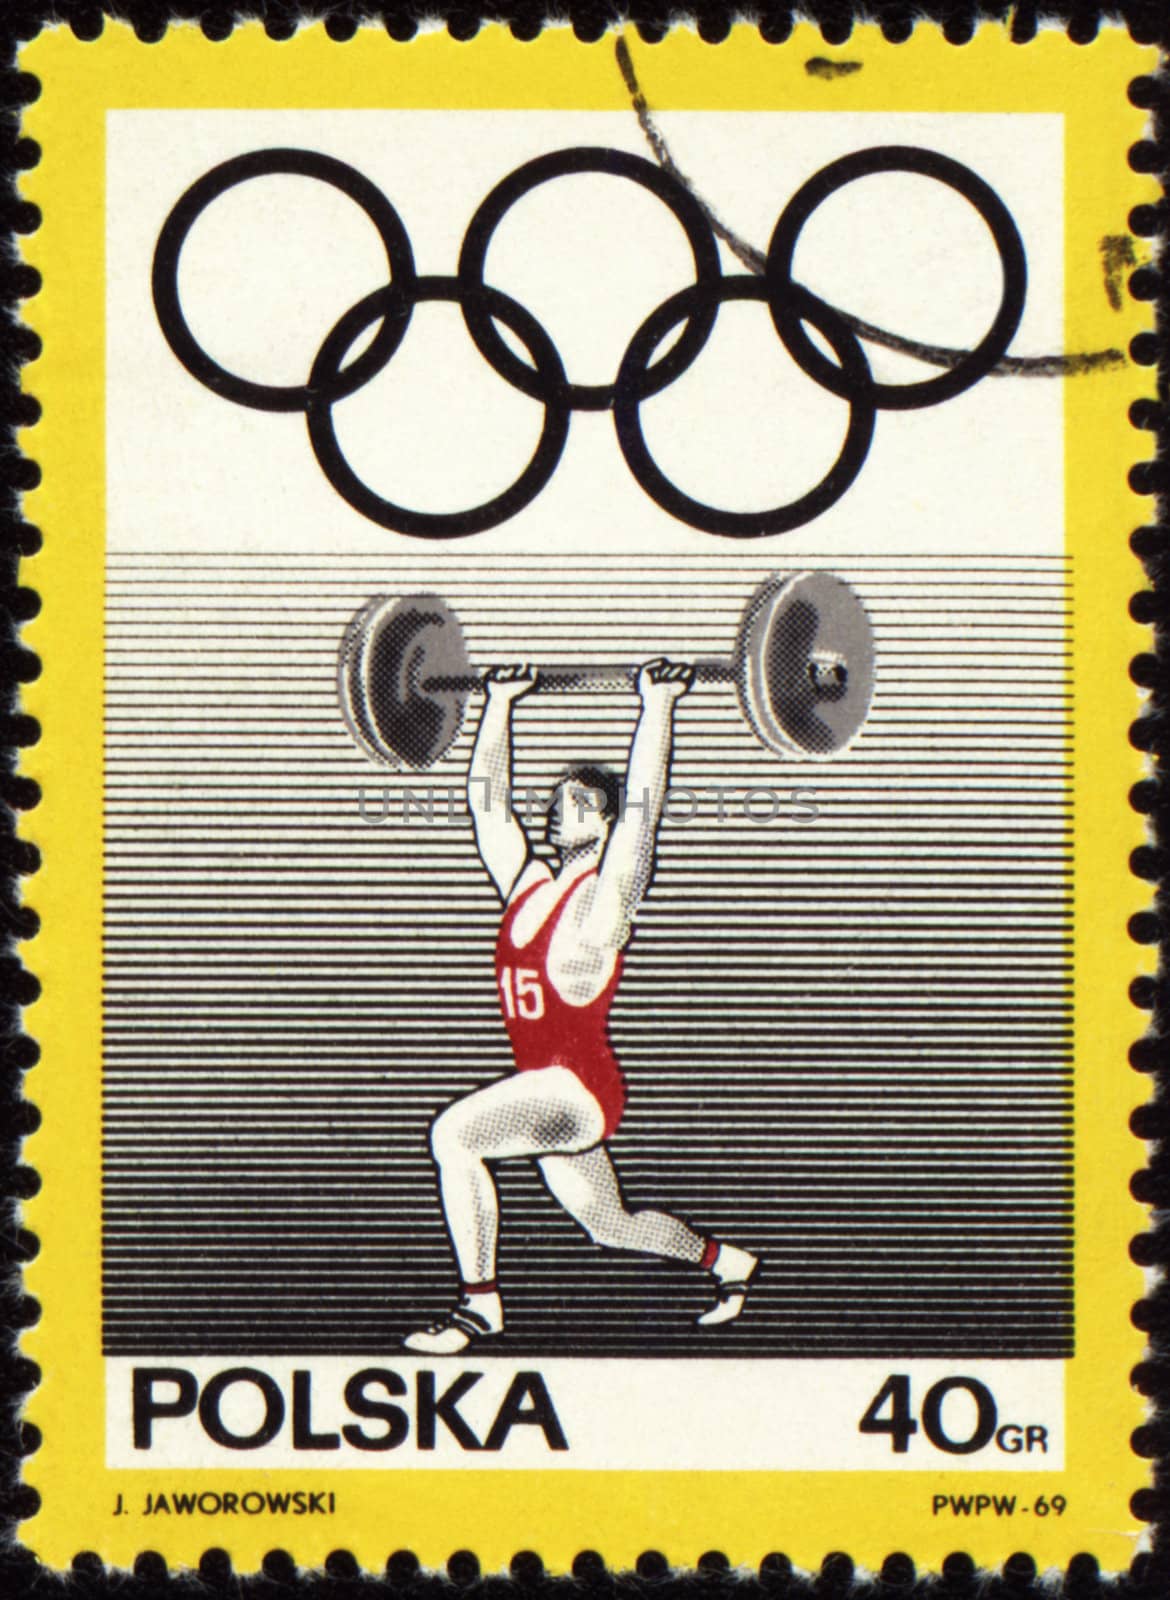 POLAND - CIRCA 1969: A post stamp printed in Poland shows weight kifter, series, circa 1969